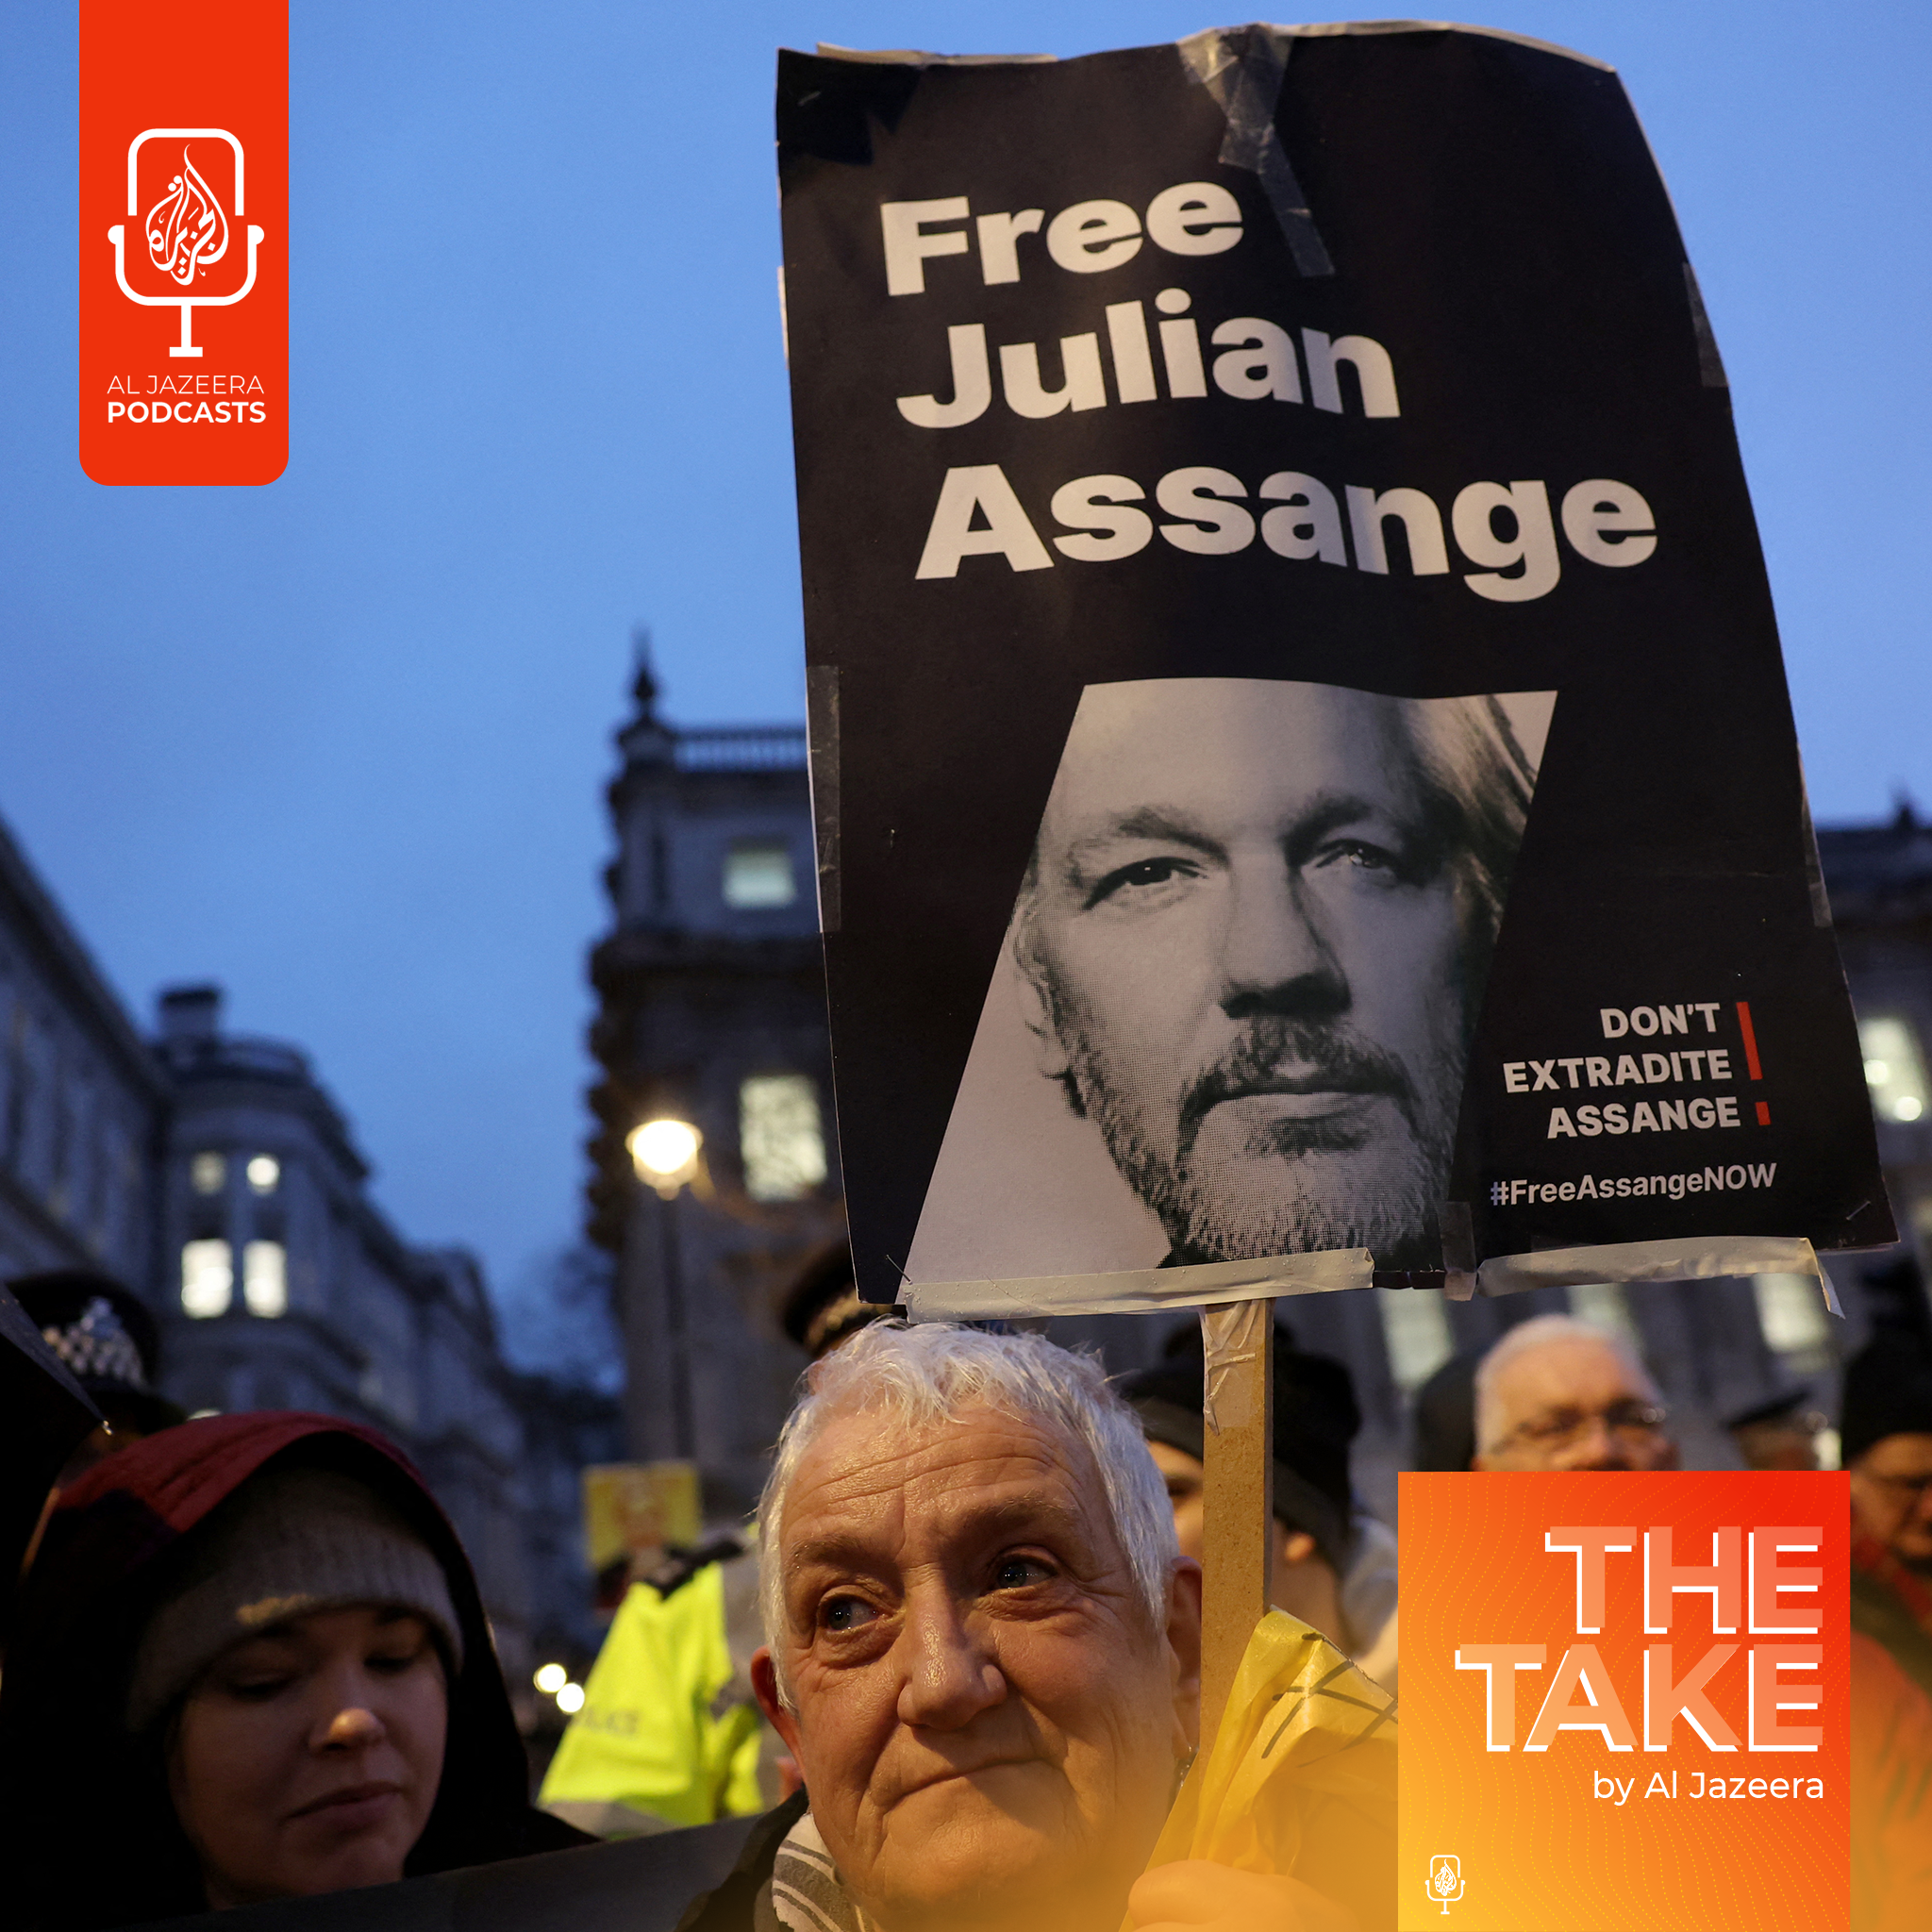 What will happen to Julian Assange if he is extradited?